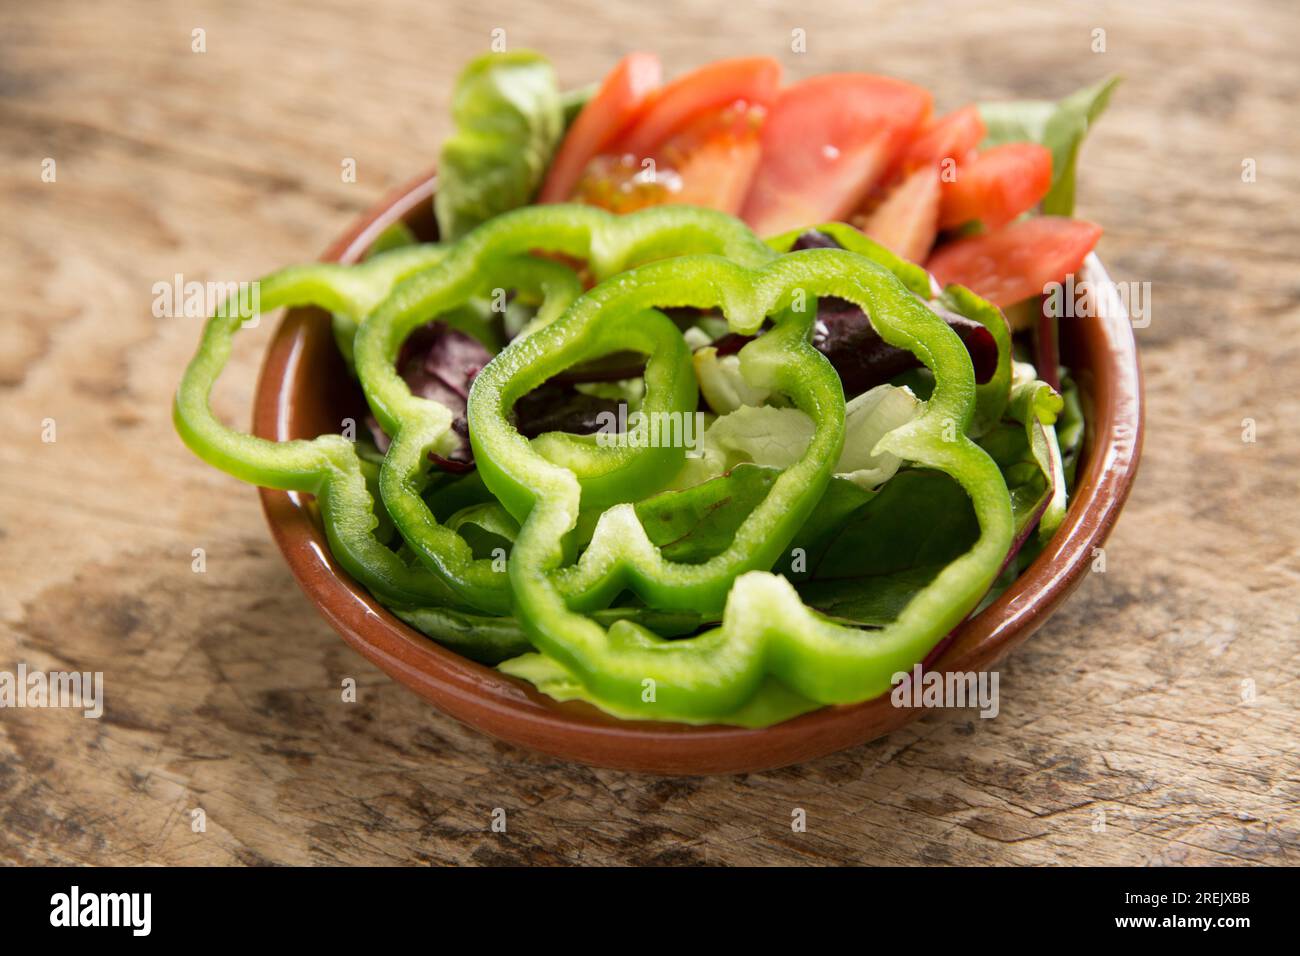 A bowl of mixed salad set on a wooden chopping board. It consists of sliced green bell peppers, tomatoes and baby leaf salad. England UK GB Stock Photo